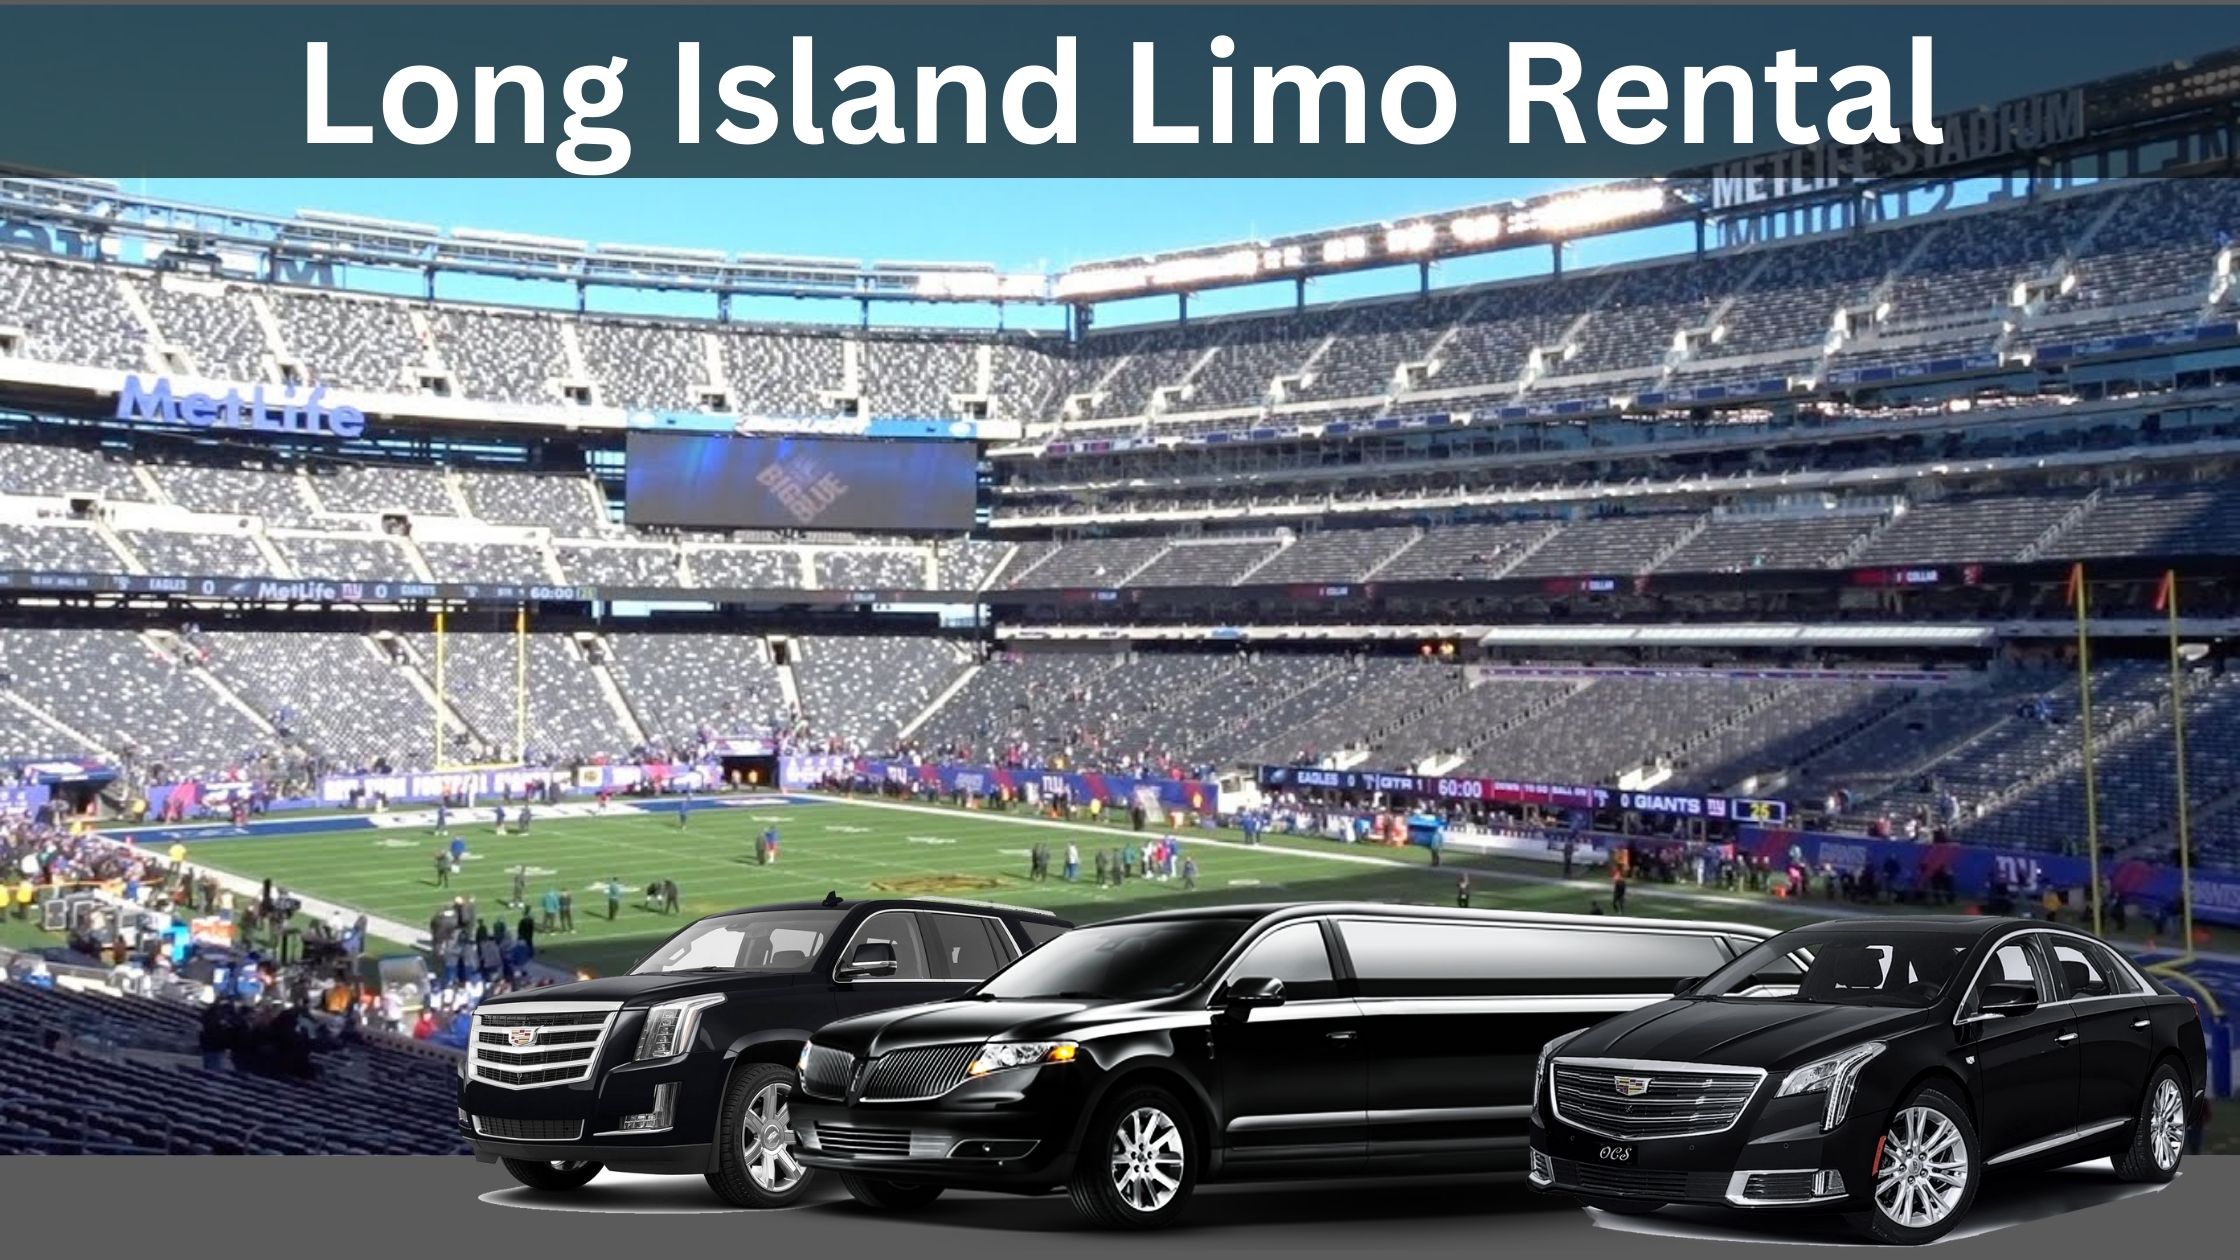 Experience the Ultimate Jets vs Giants Game Day with Long Island Limo Rental